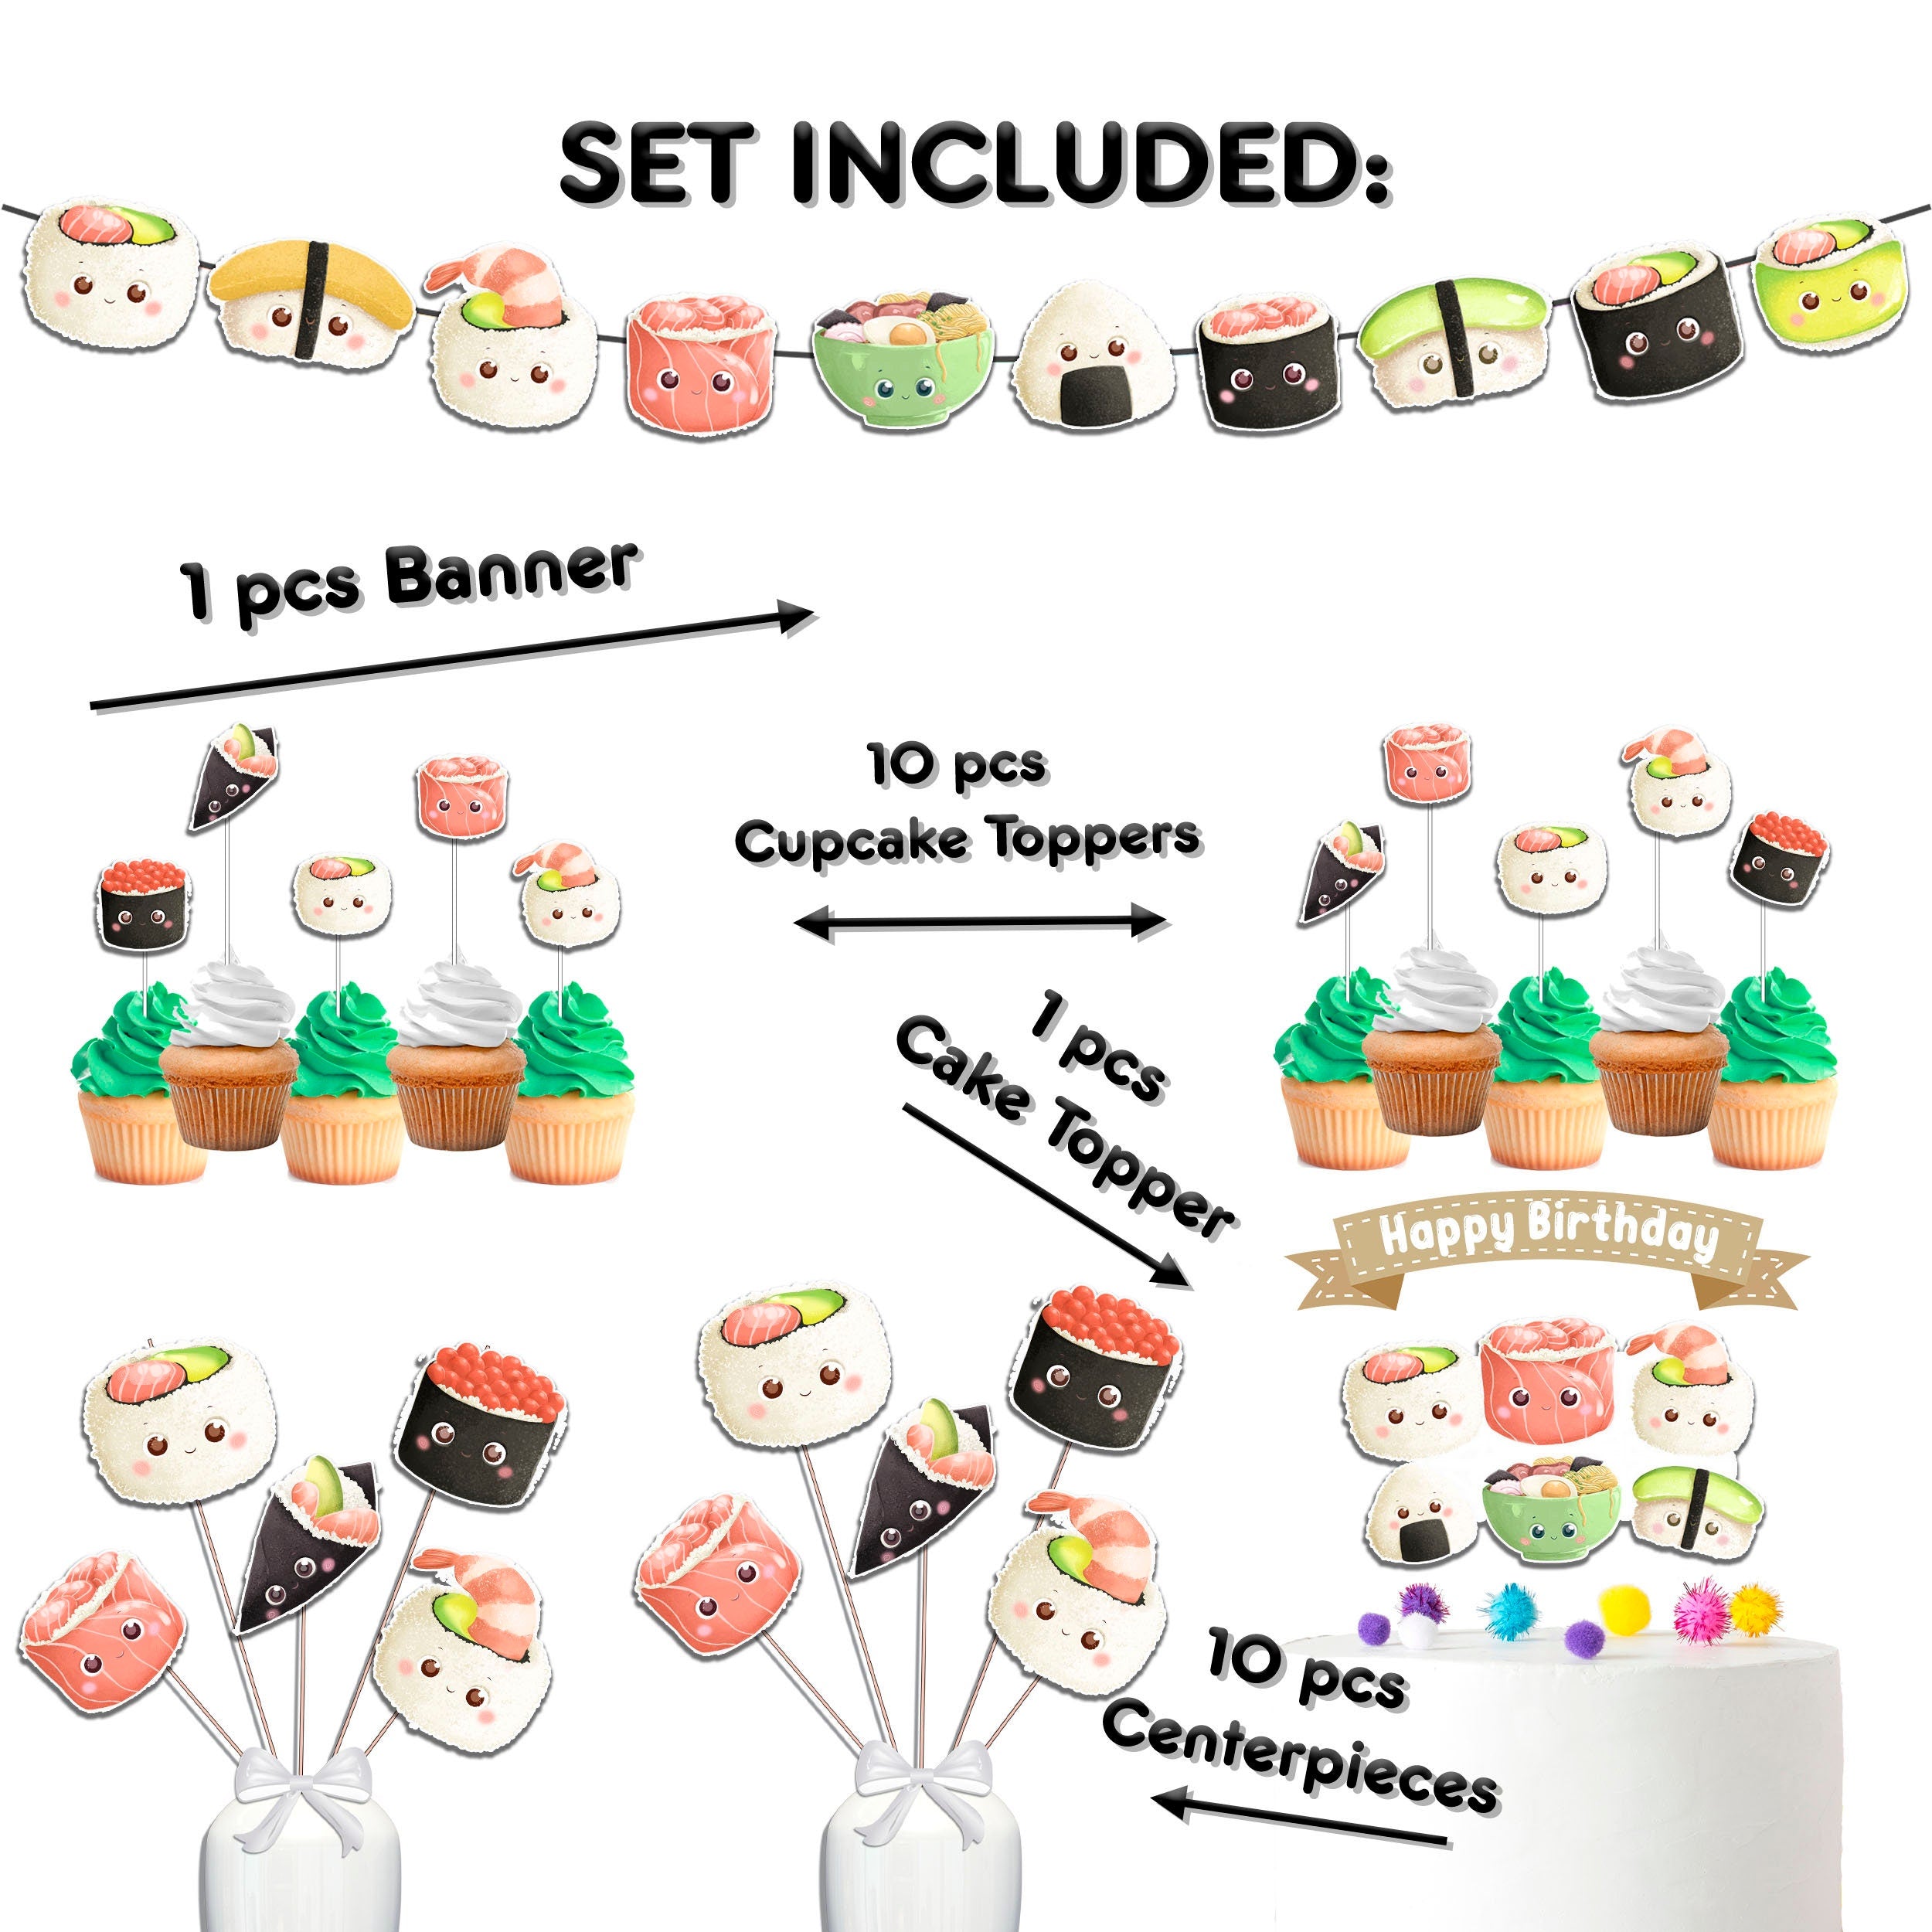 Sushi Delight Party Decor Set - Banner, Cake Topper, Cupcake Toppers & Centerpieces for Foodie Birthdays & Baby Showers